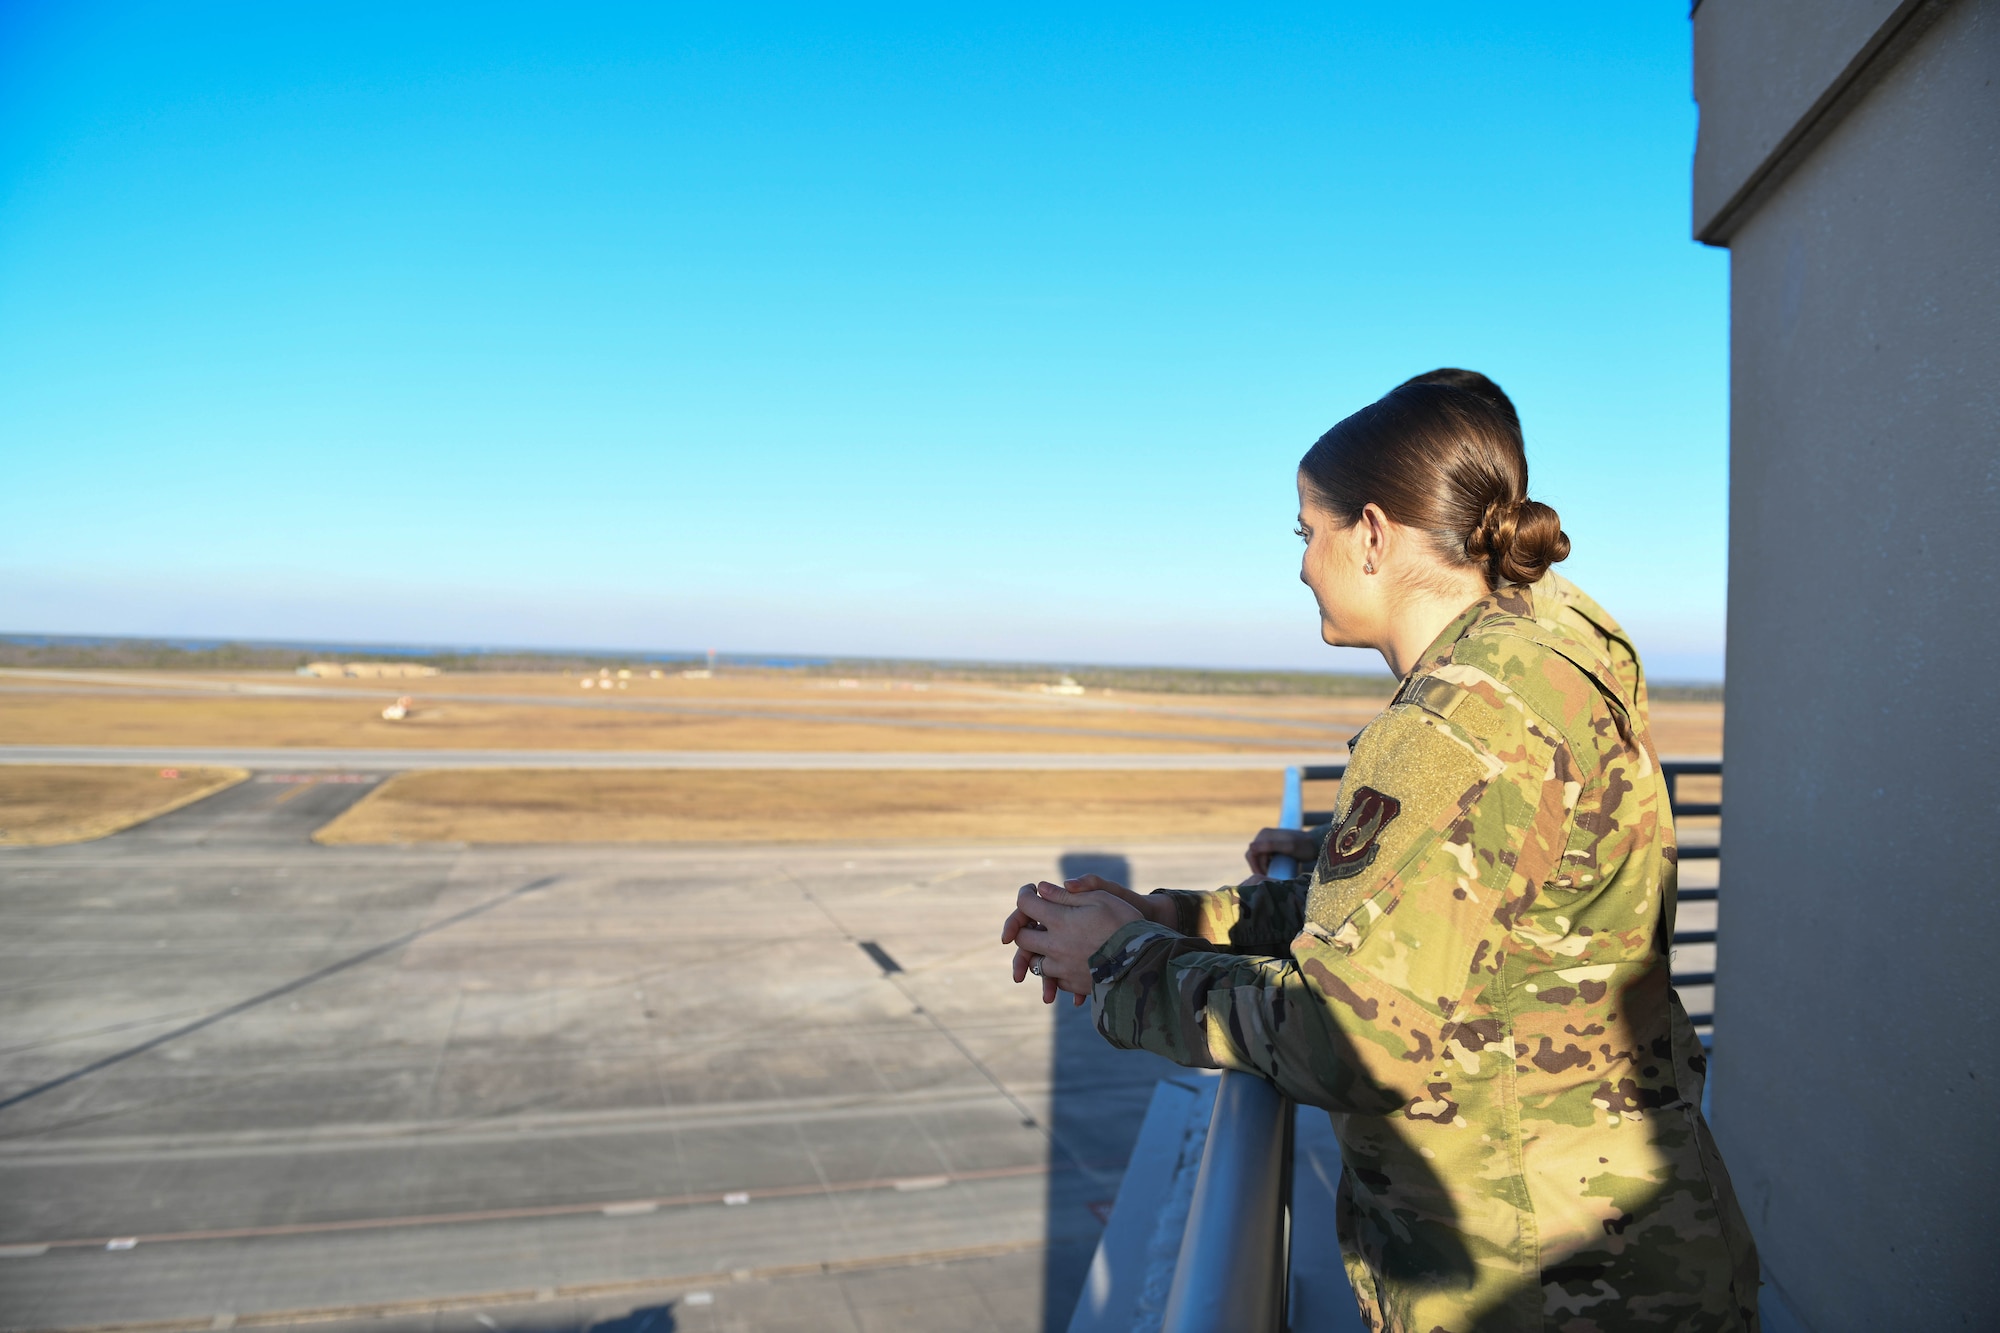 2nd Lt. Colleen Kuykendall looks at the flight line from the air traffic control tower.